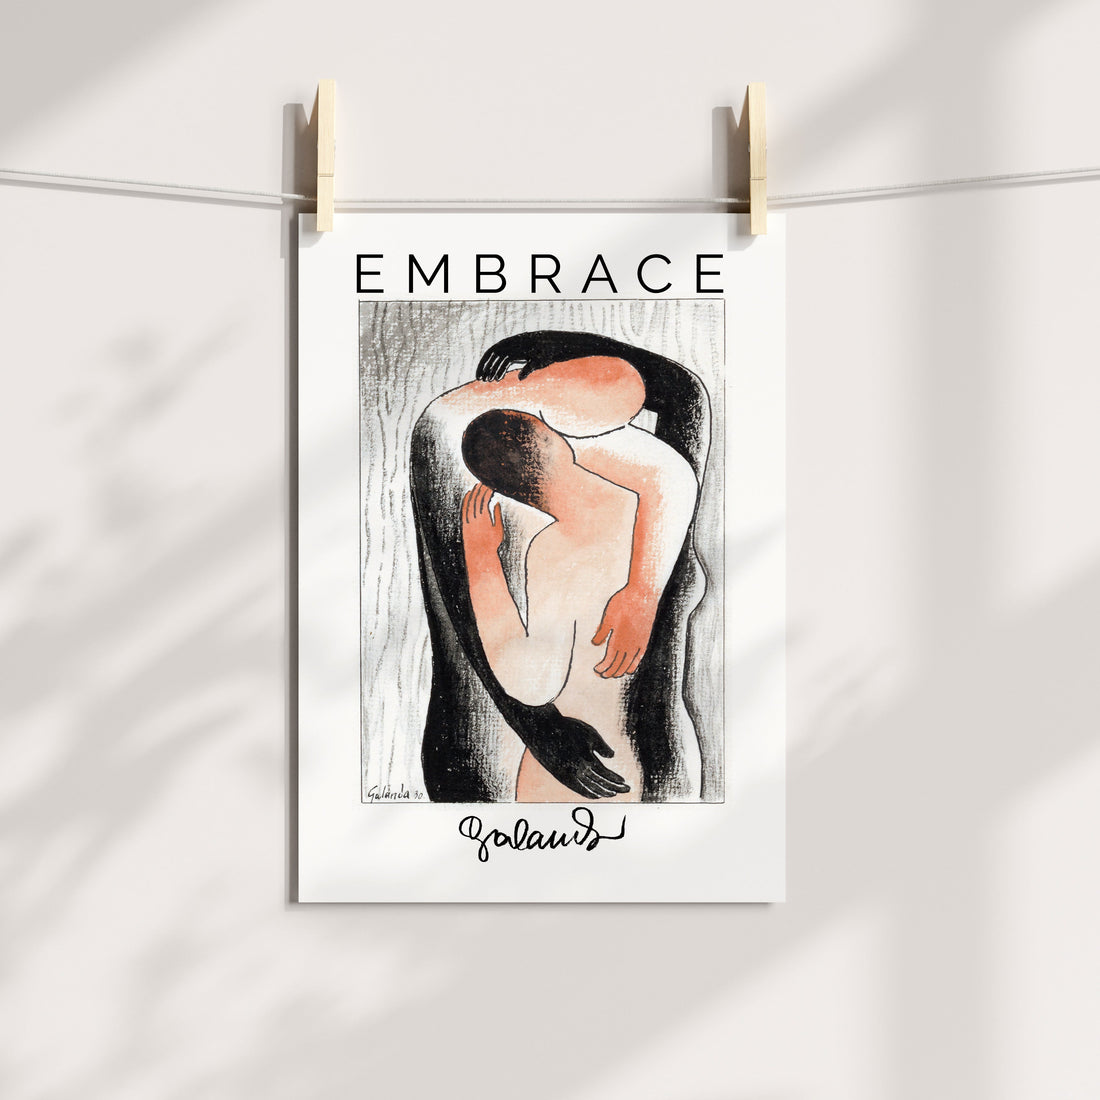 Embrace - Gallery / Exhibition Poster Printable Art